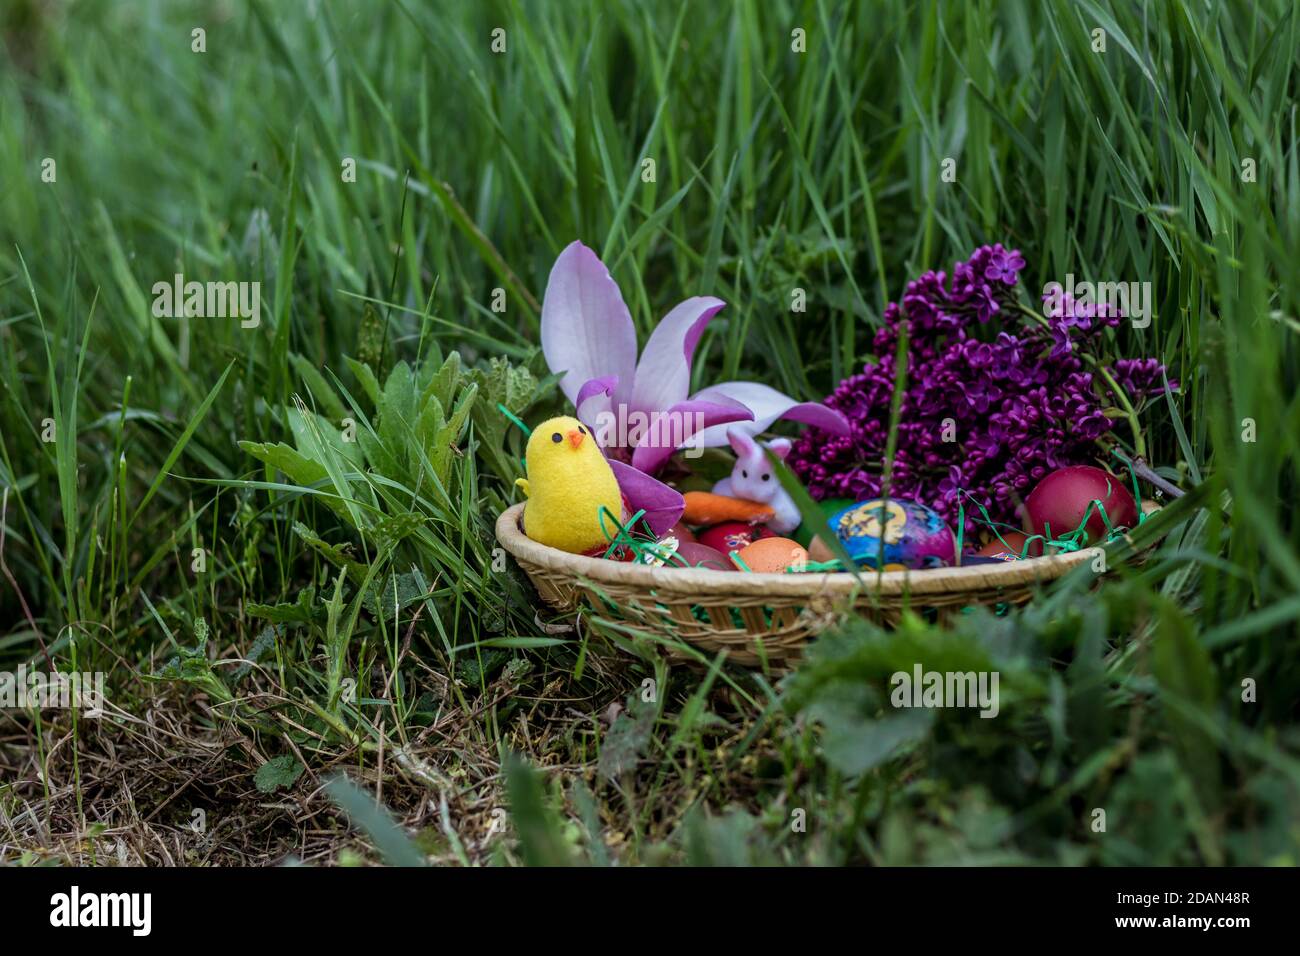 Small basket full of Easter decoration outside in the grass . Eggs, chick, bunny rabbit, flowers. Stock Photo